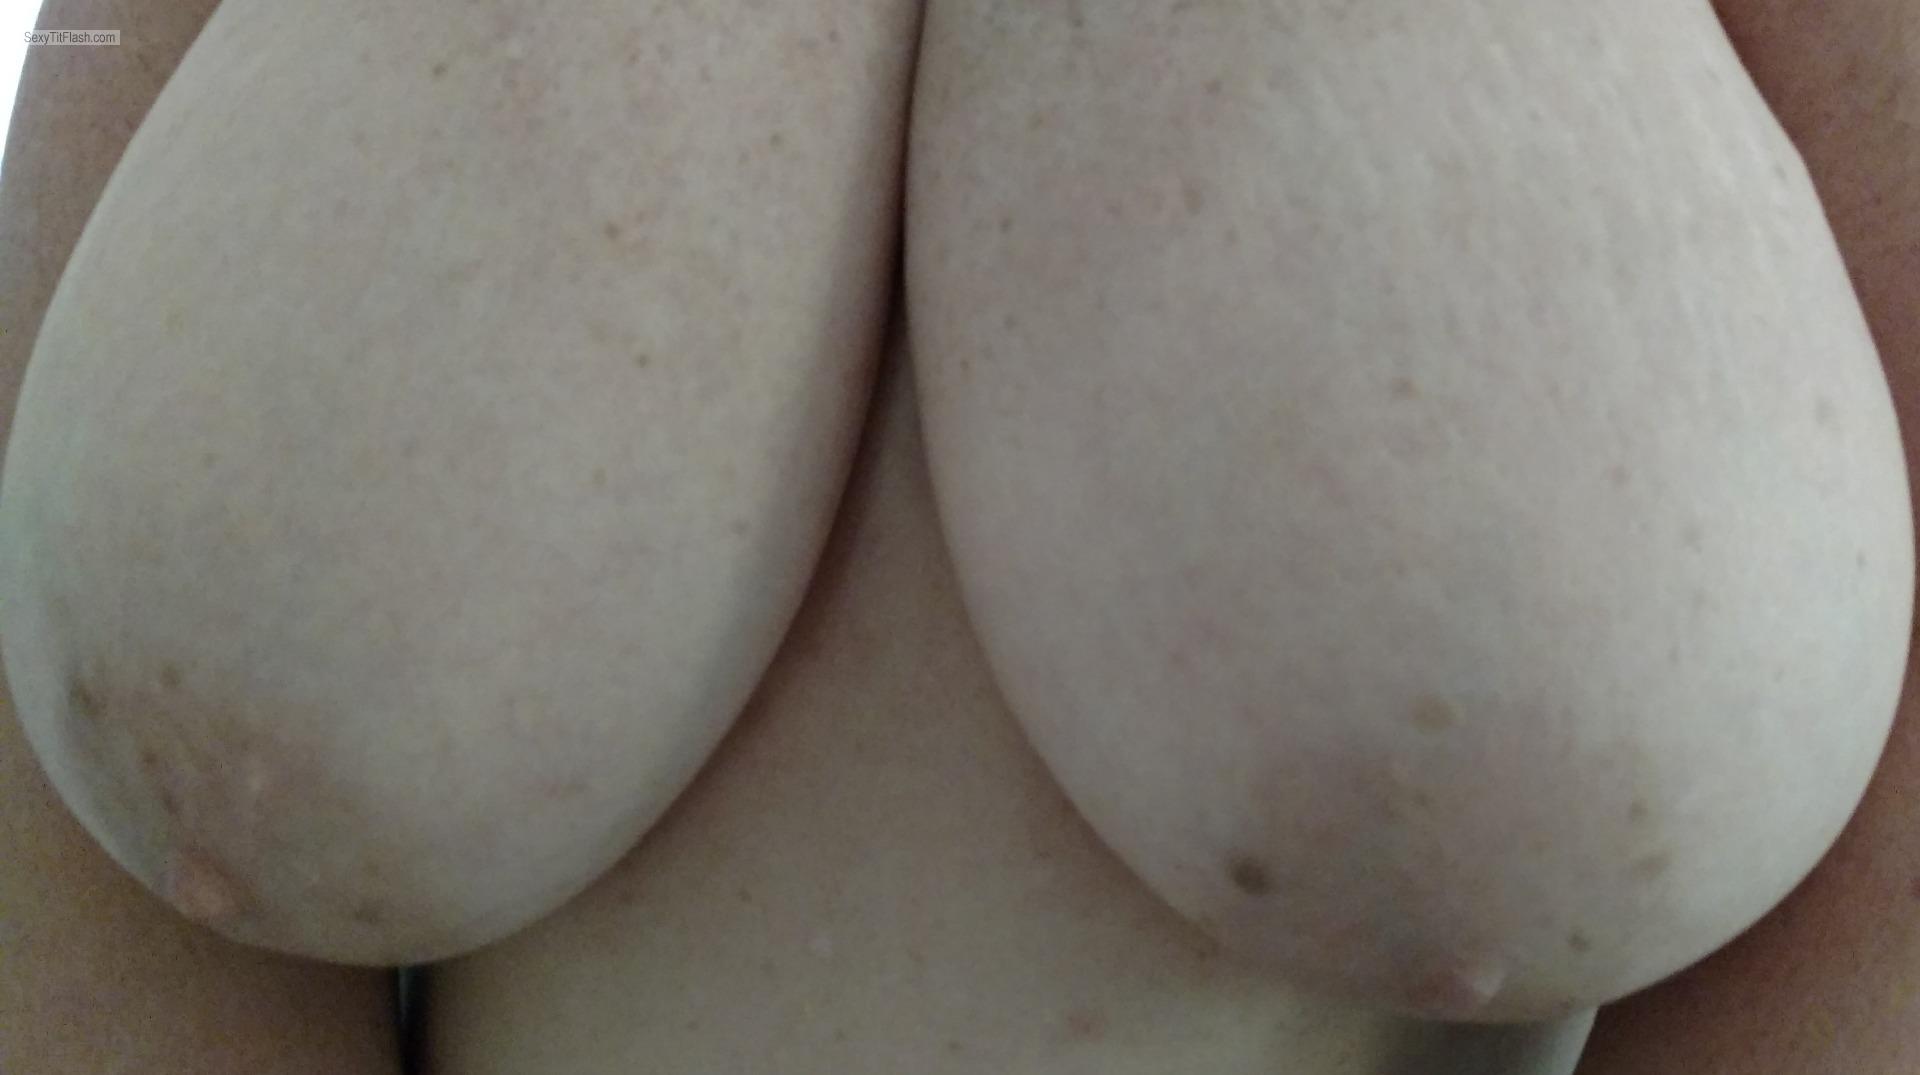 Tit Flash: My Very Big Tits - Baby-G from United States